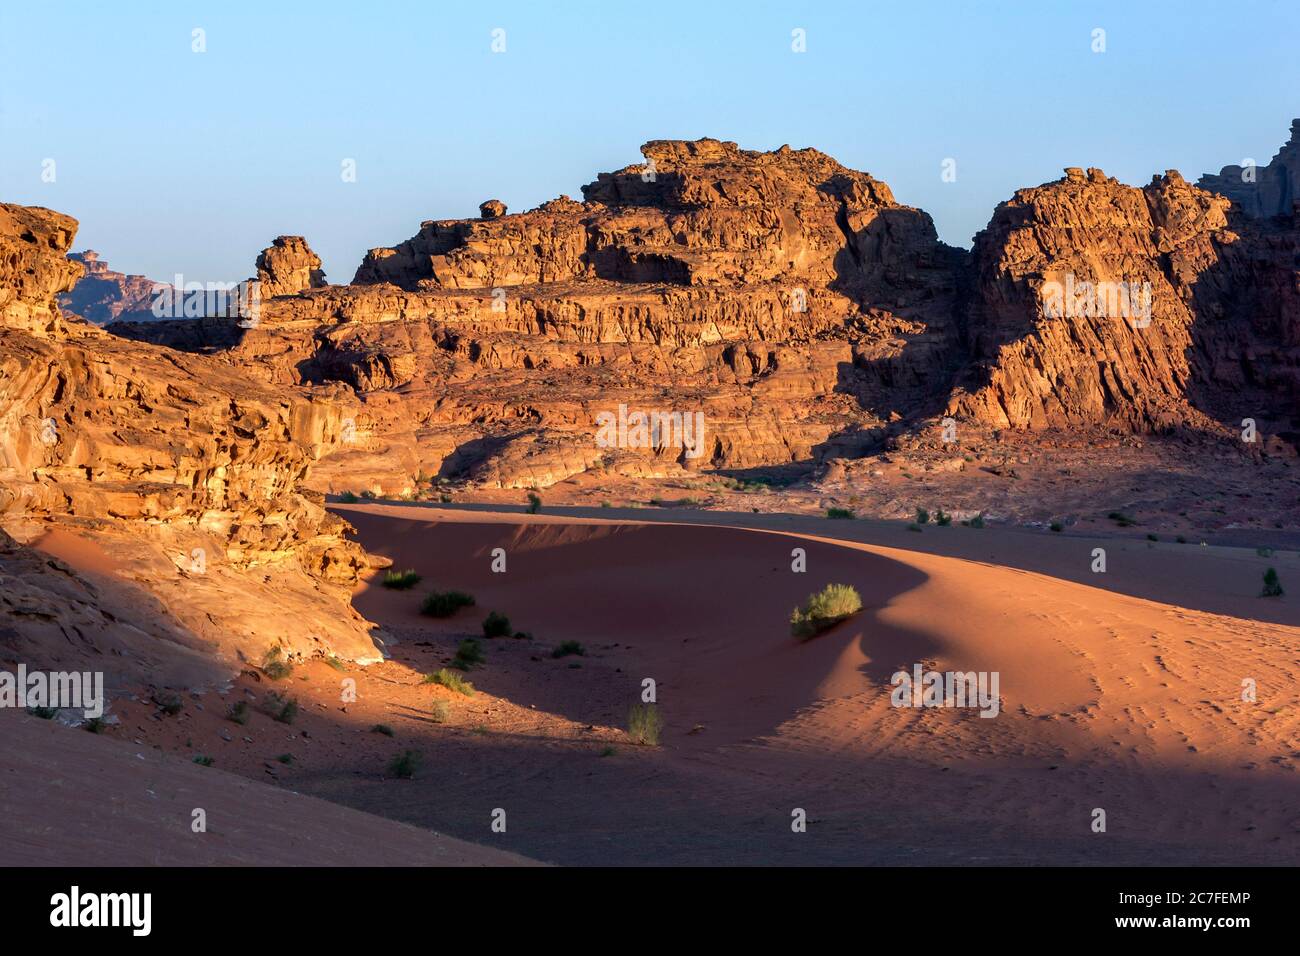 The sun begins to rise over a section of the desert landscape at Wadi Rum in Jordan. Stock Photo